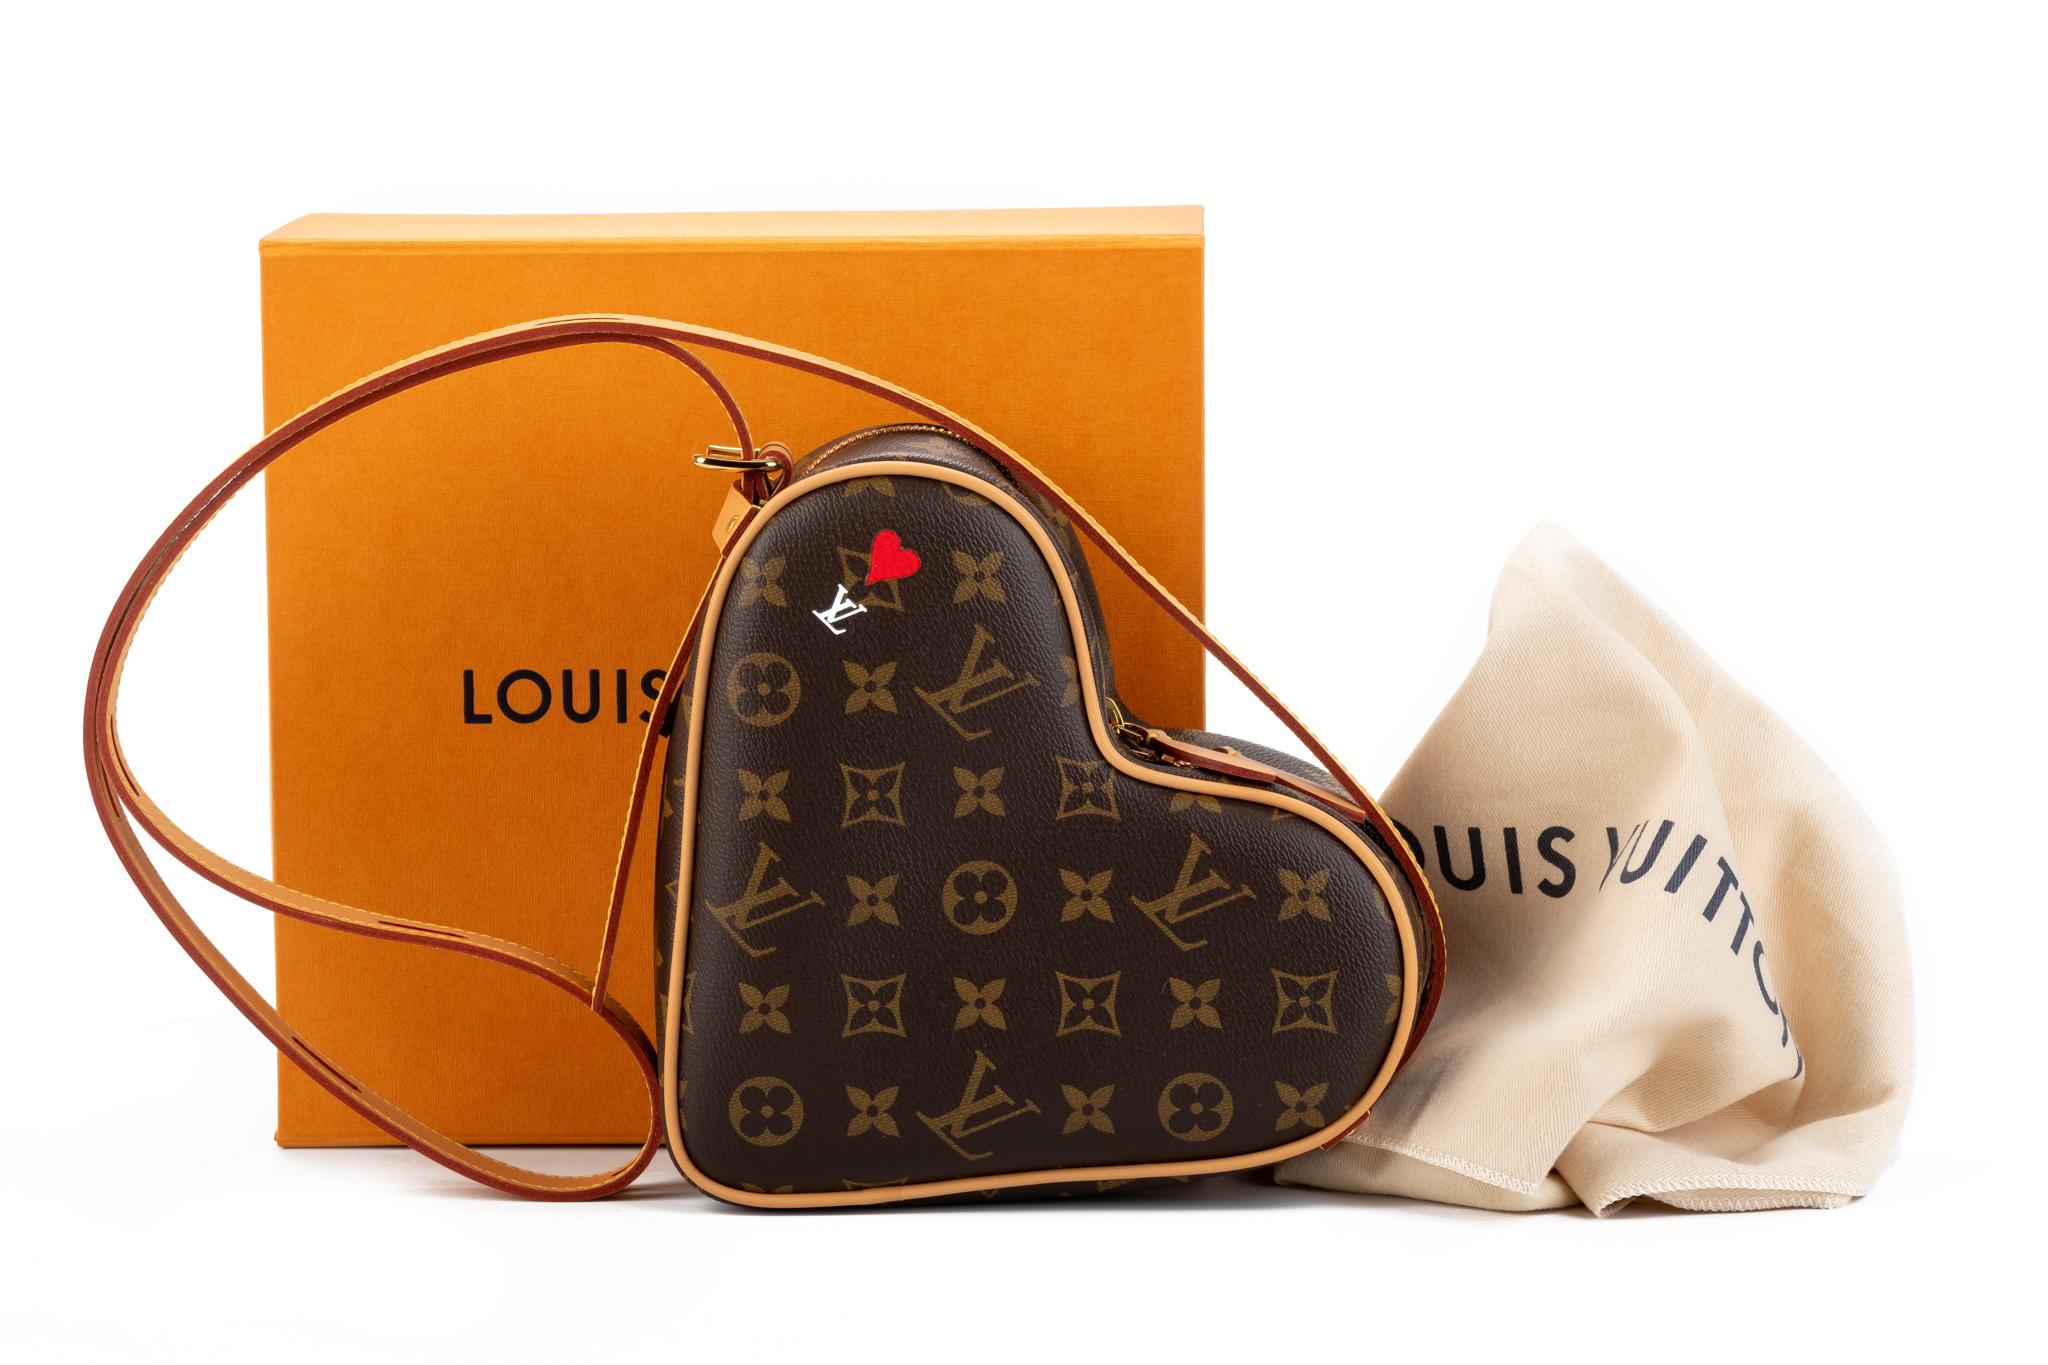 Louis Vuitton limited edition heart shaped cross body bag. Classic monogram print with heart painted detail. Adjustable strap. Shoulder drop 21